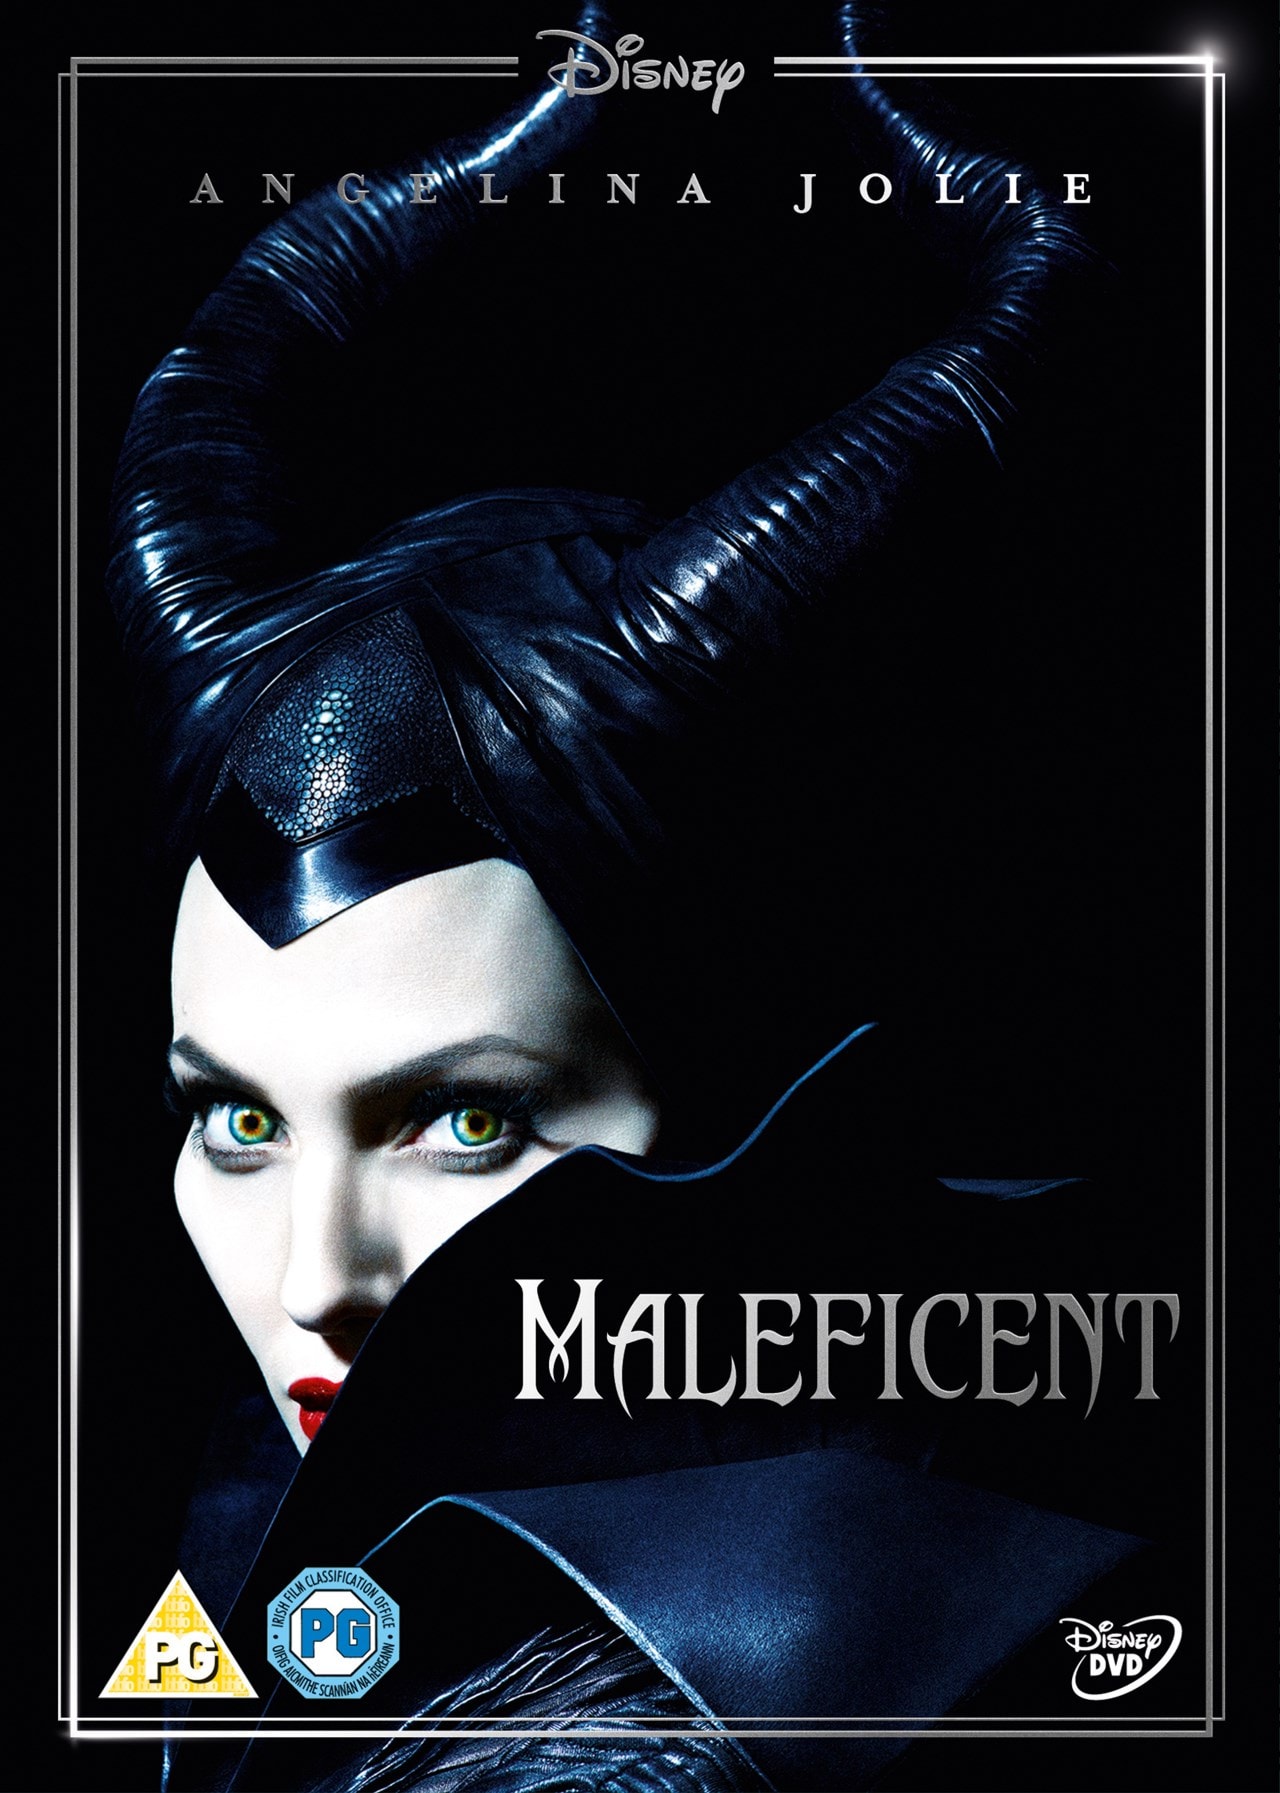 Maleficent | DVD | Free shipping over £20 | HMV Store